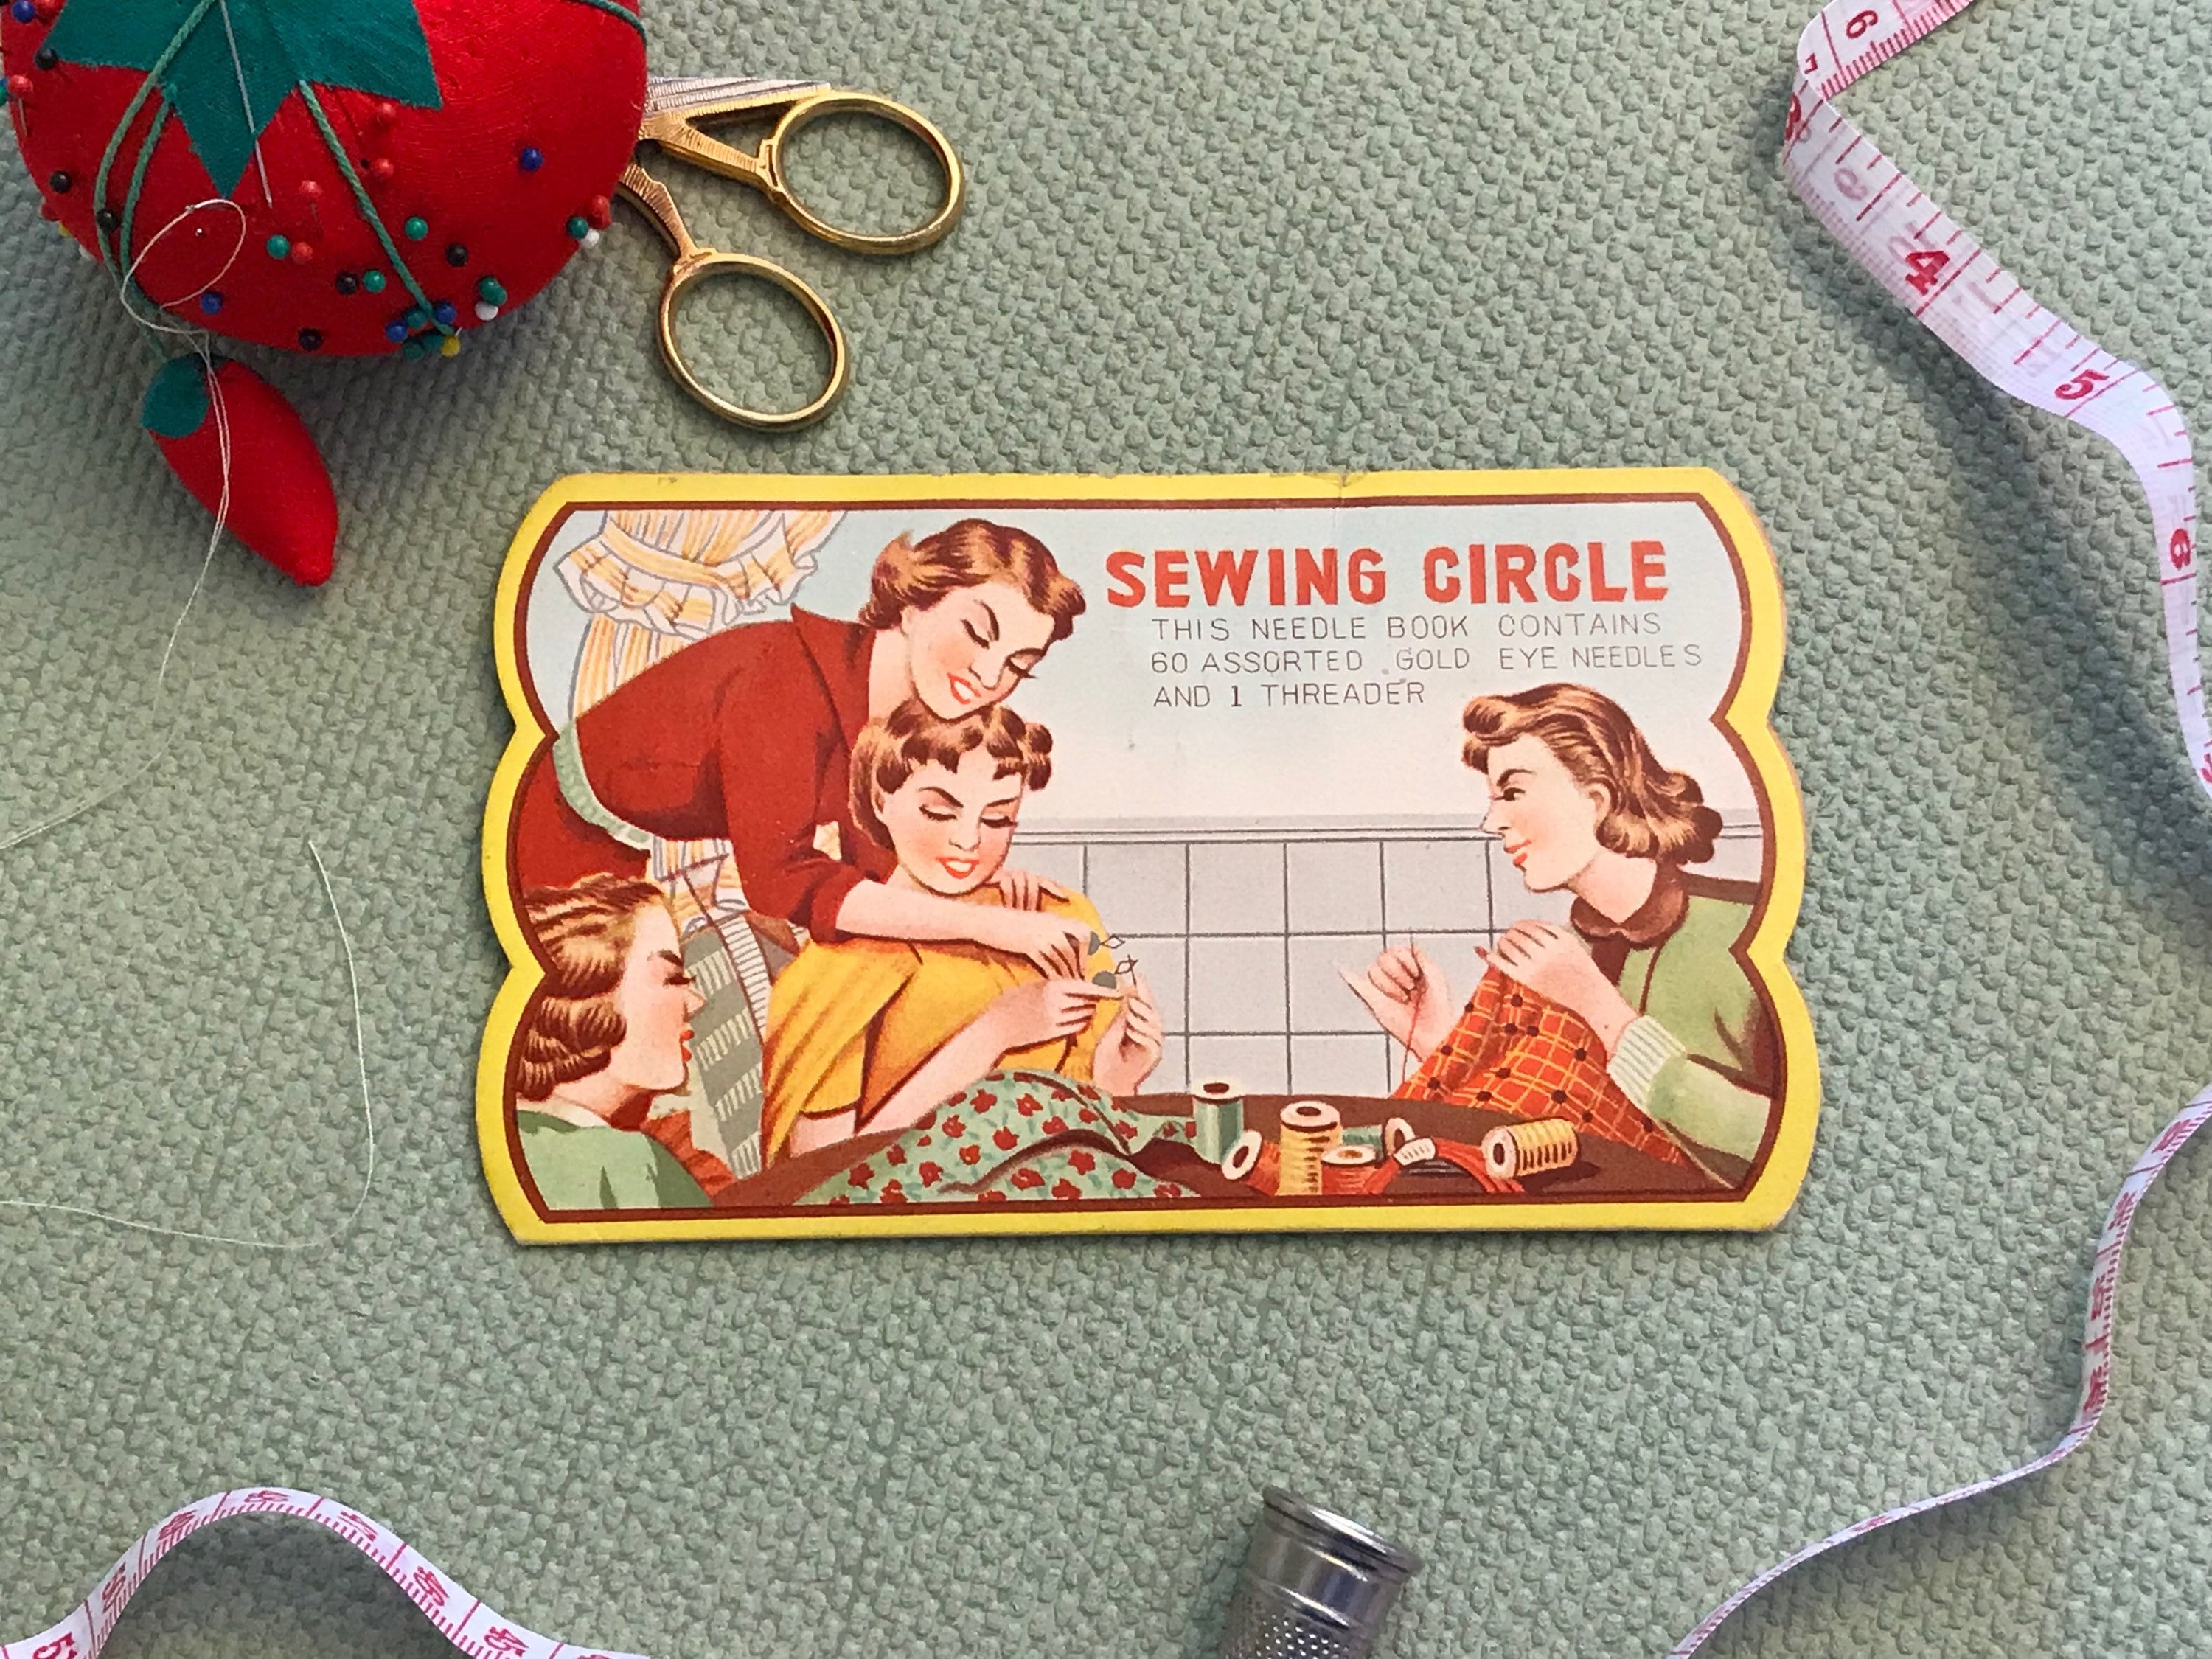 Vintage Sewing Needle Case, Sewing Circle Needles, collectible needle case,  Sewing Needles, Sewing Room decor, gift for her, collectible